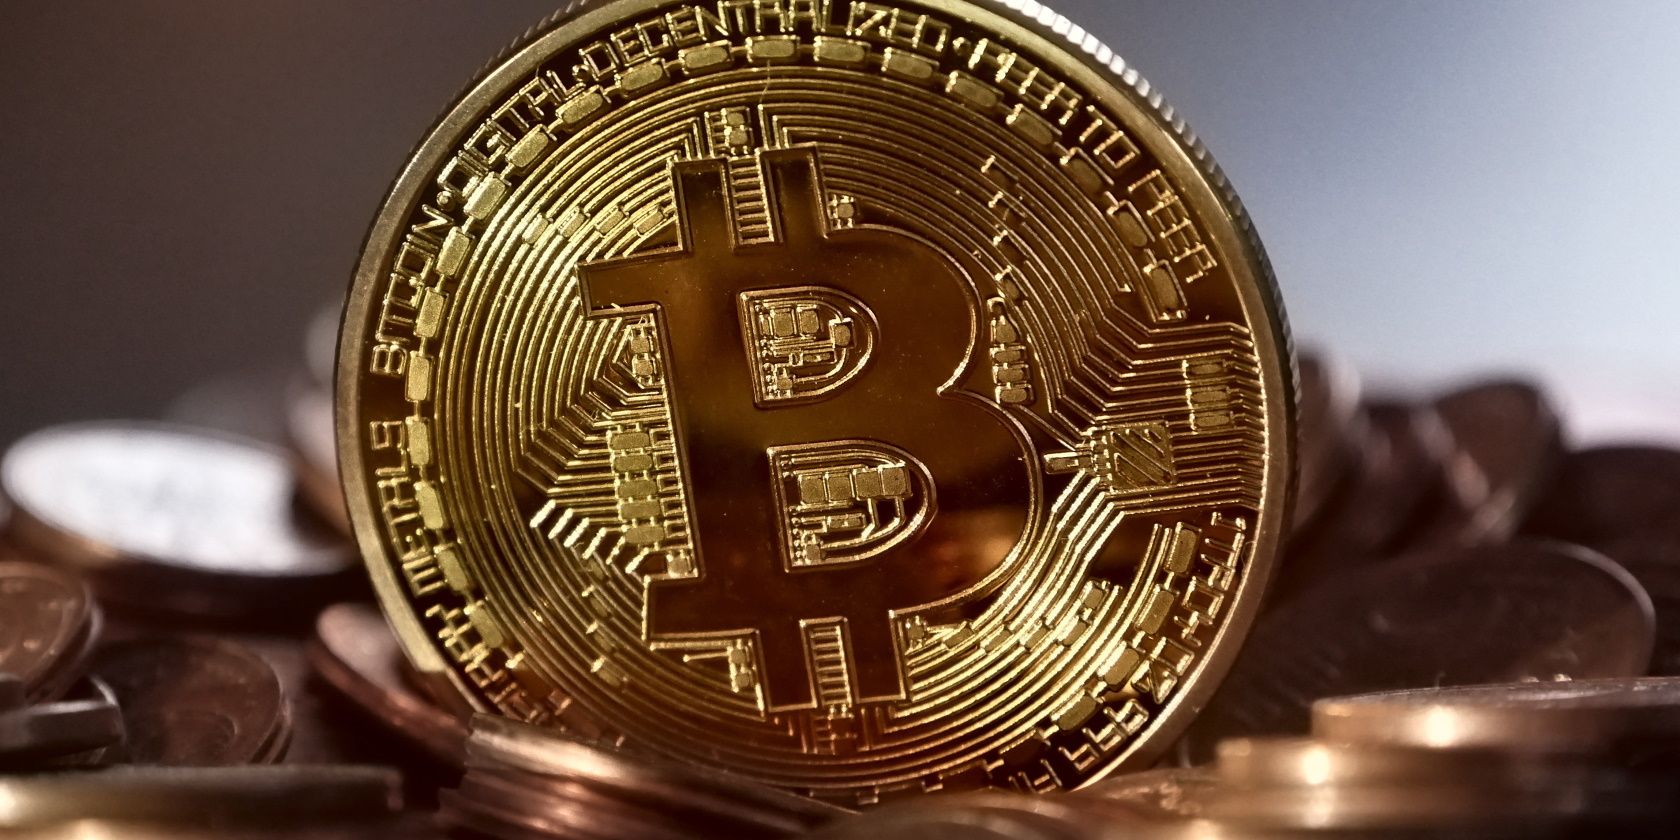 A golden coin with Bitcoin's symbol on it among other golden coins.